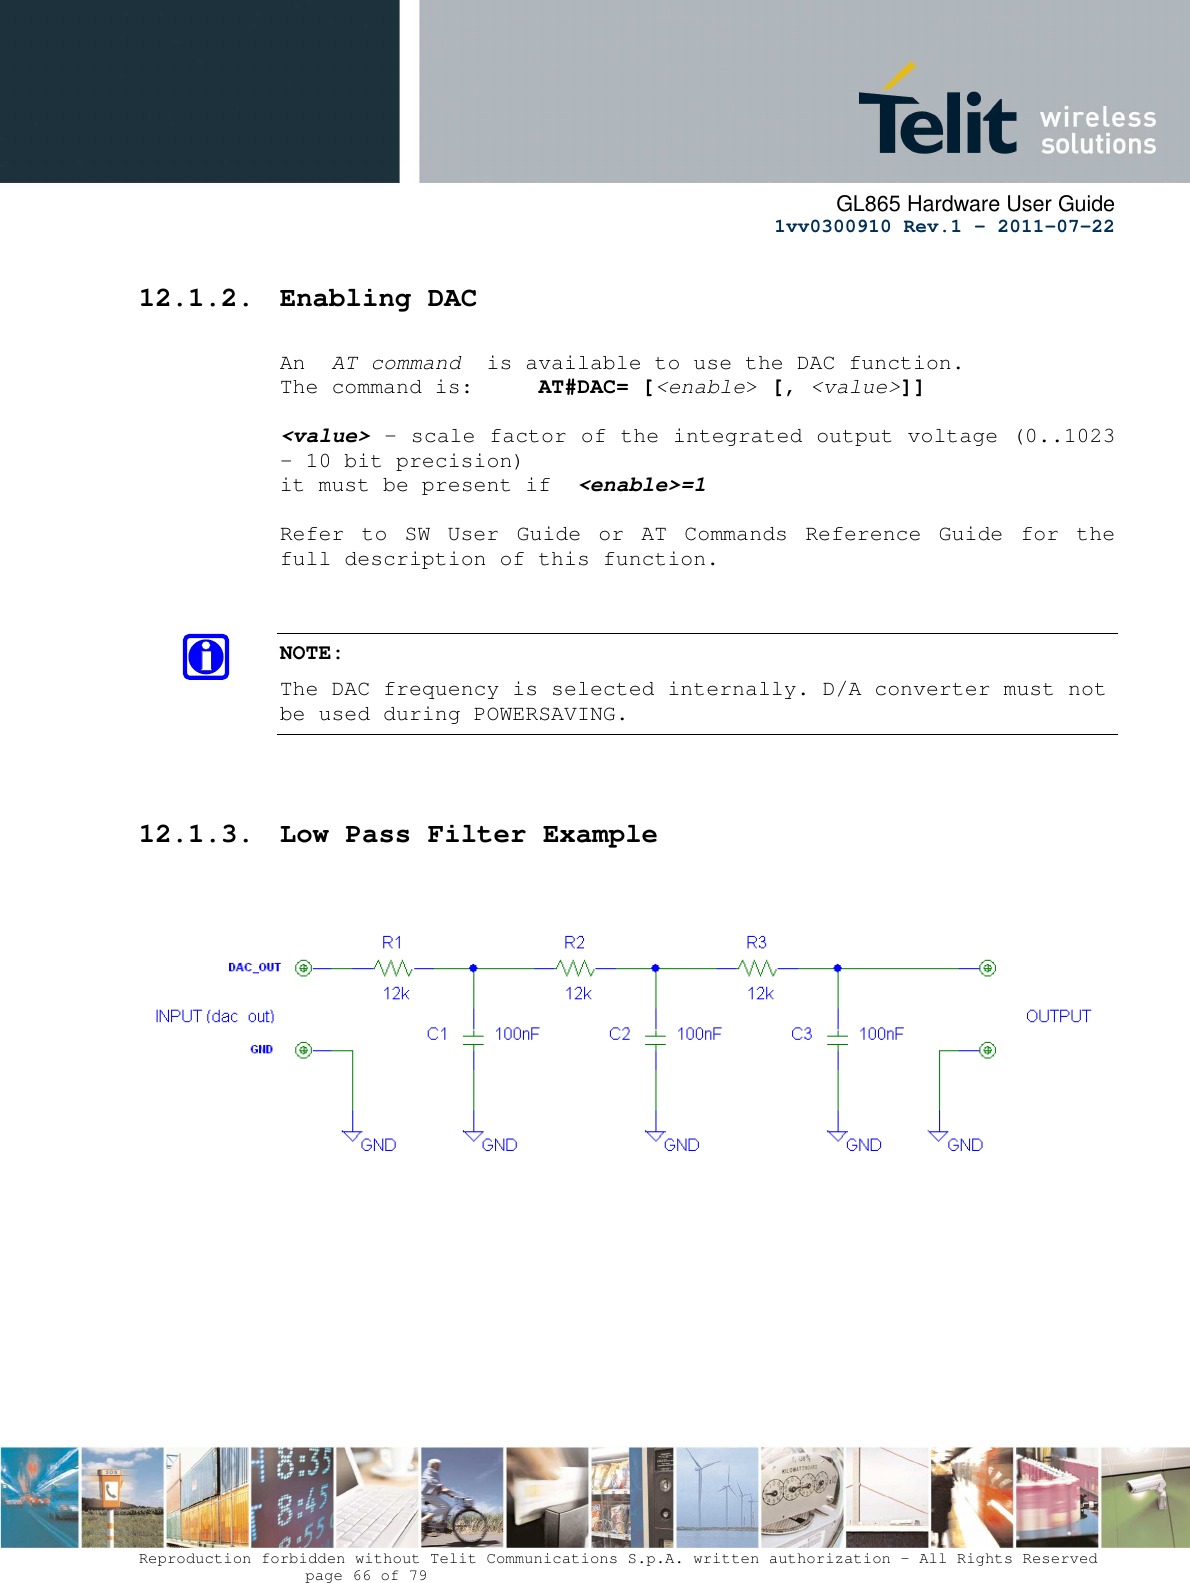      GL865 Hardware User Guide     1vv0300910 Rev.1 – 2011-07-22       Reproduction forbidden without Telit Communications S.p.A. written authorization - All Rights Reserved    page 66 of 79  12.1.2. Enabling DAC  An  AT command  is available to use the DAC function. The command is:     AT#DAC= [&lt;enable&gt; [, &lt;value&gt;]]  &lt;value&gt; - scale factor of the integrated output voltage (0..1023 - 10 bit precision) it must be present if  &lt;enable&gt;=1  Refer  to  SW  User  Guide  or  AT  Commands  Reference  Guide  for  the full description of this function.   NOTE: The DAC frequency is selected internally. D/A converter must not be used during POWERSAVING.    12.1.3. Low Pass Filter Example    